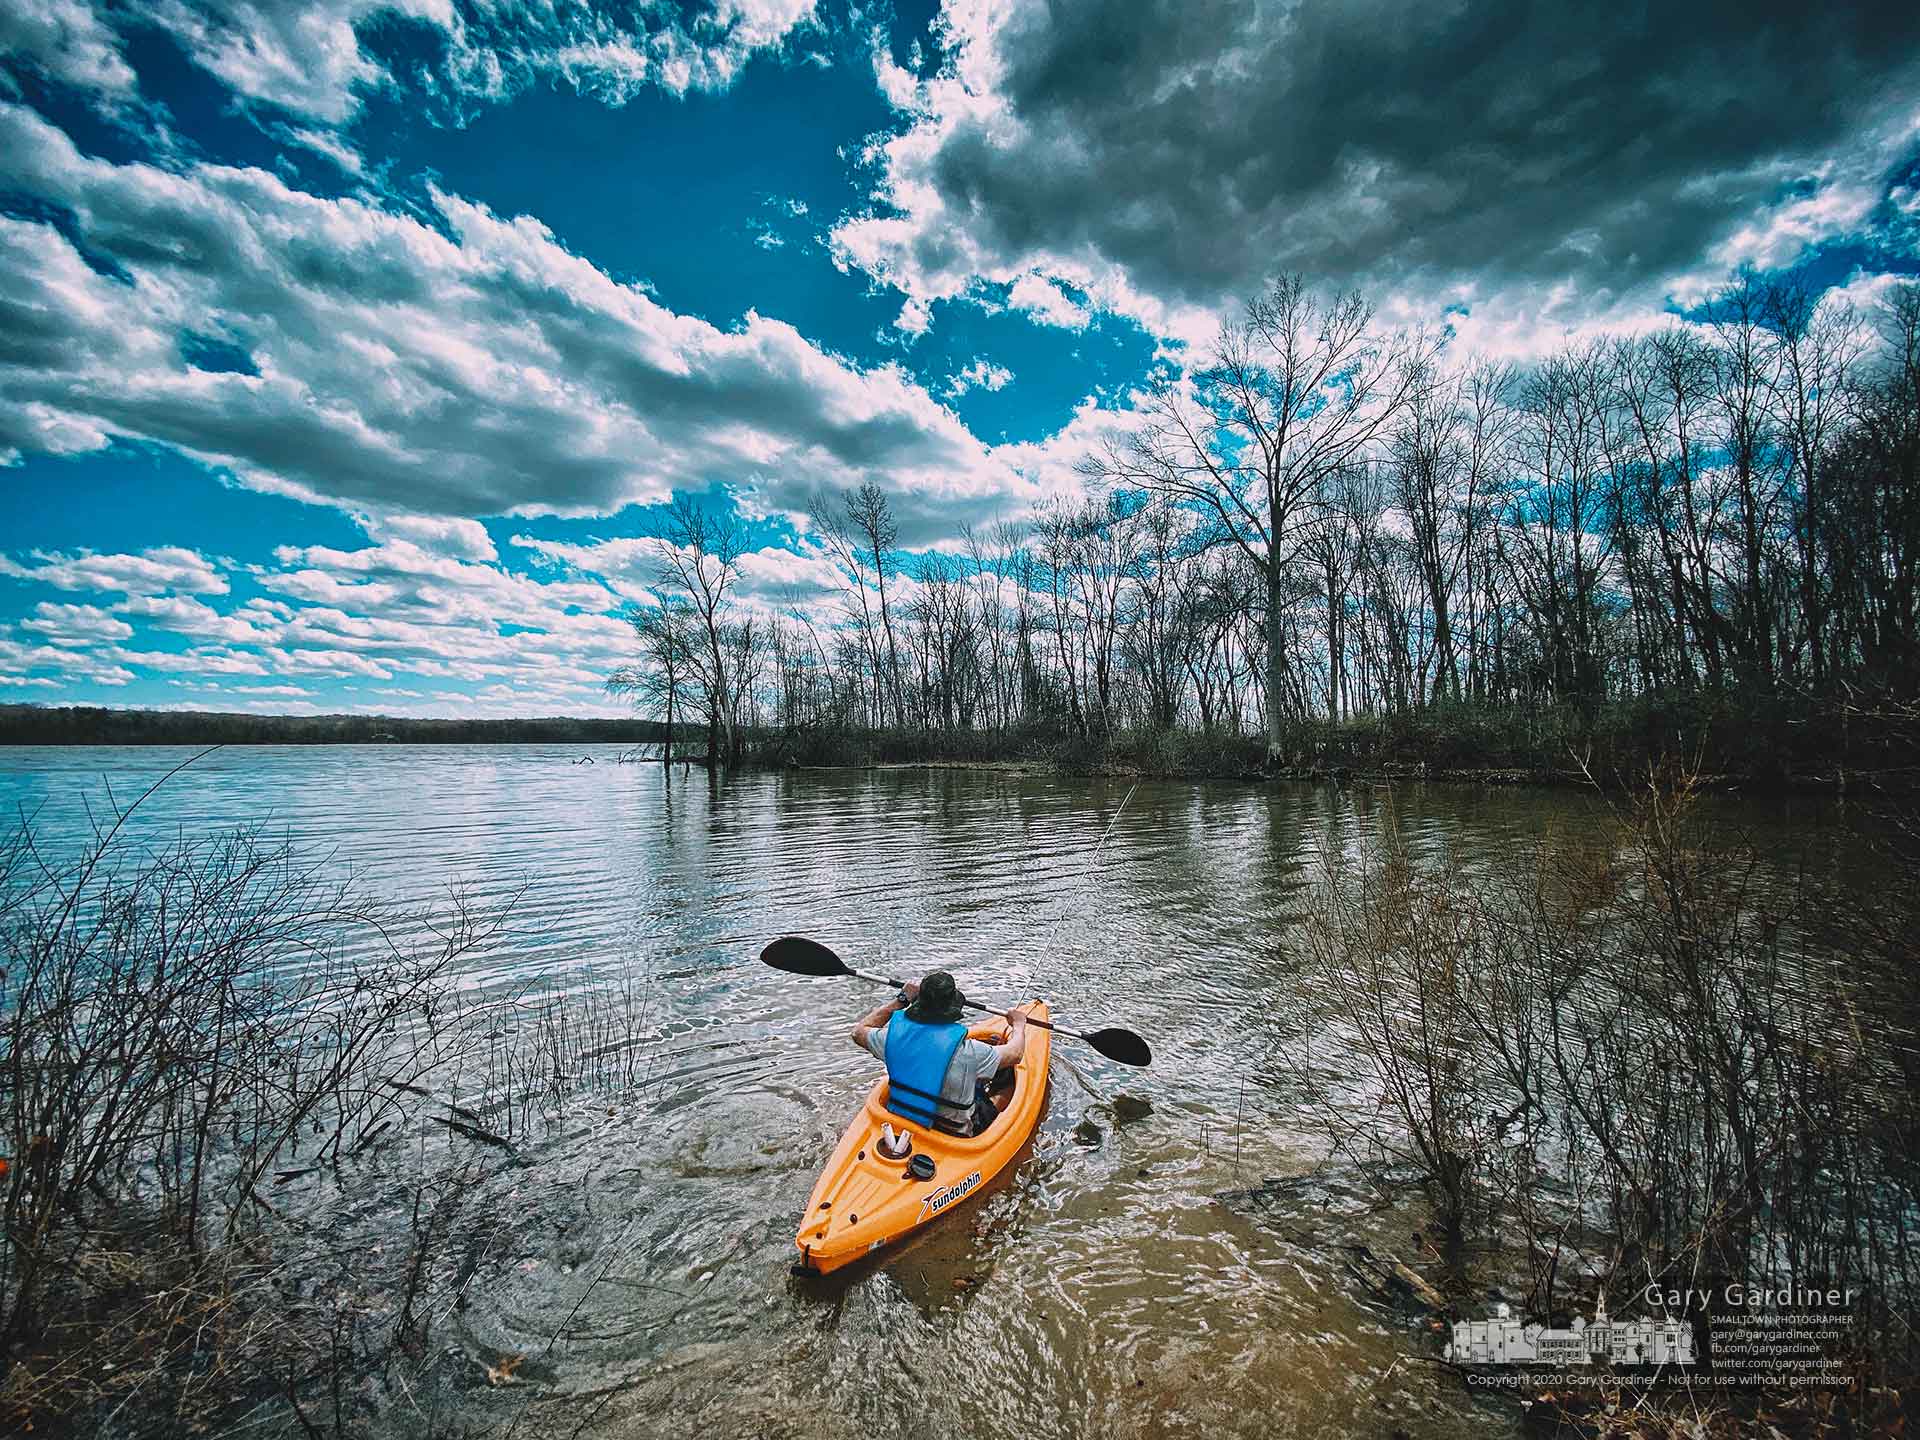 A fisherman uses his kayak to retrieve a snagged lure from the calm waters of the inlet at Red Bank Park on Hoover. My Final Photo for March 29, 2020.